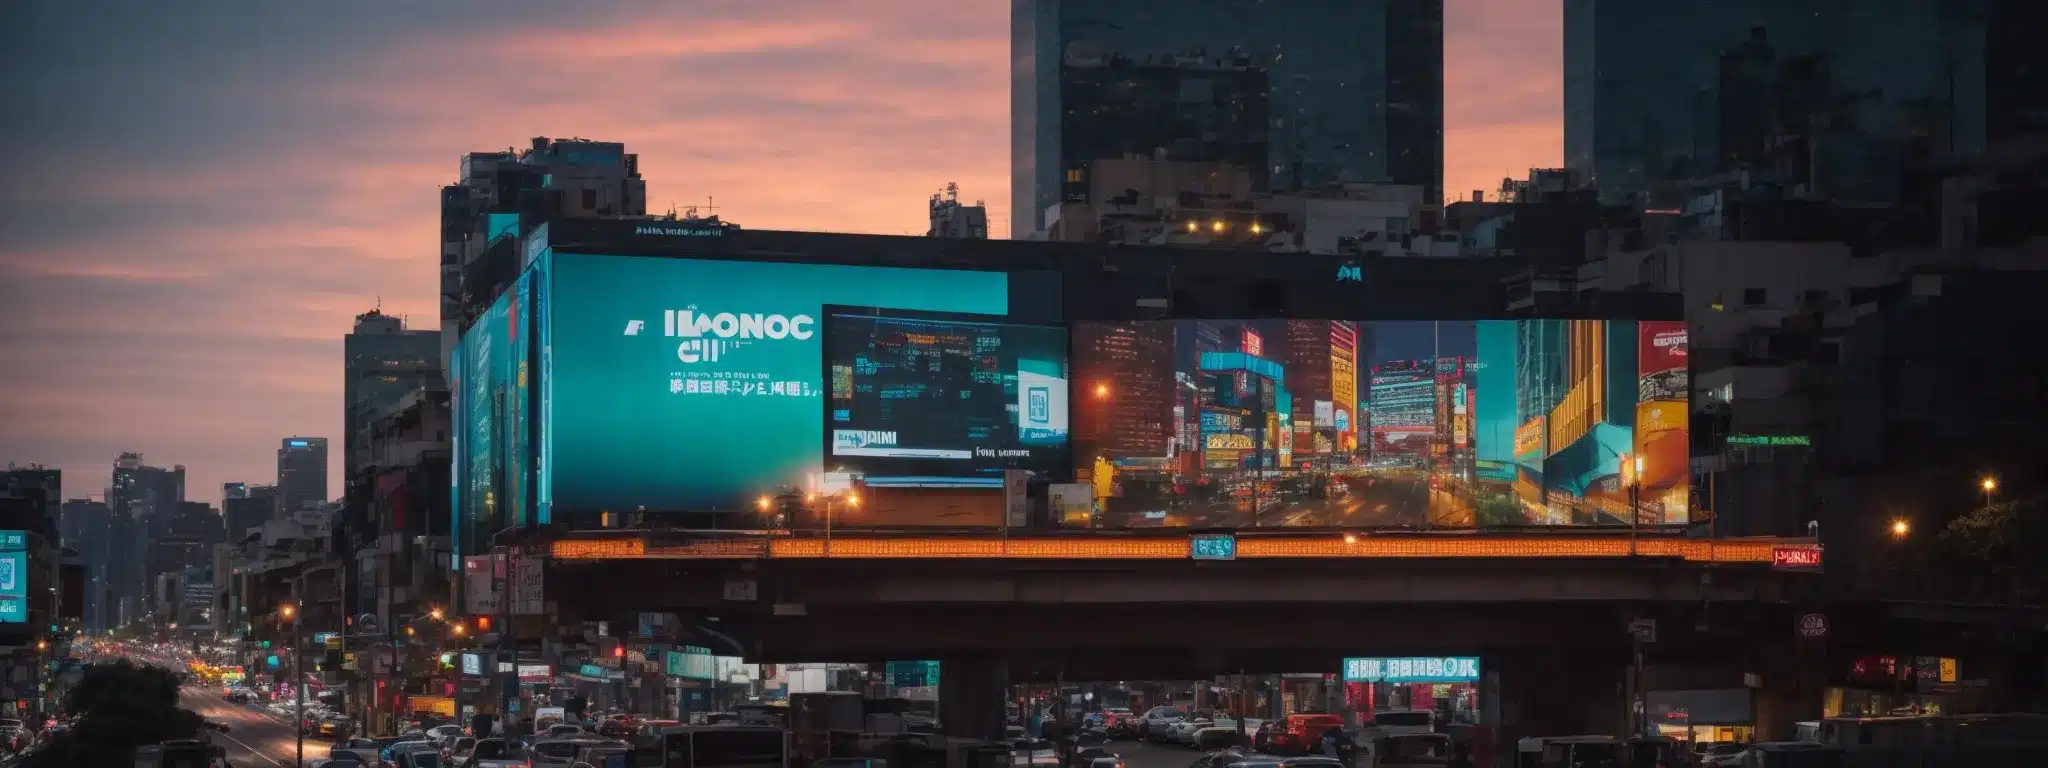 A Vibrant Billboard Set Against A Bustling City Backdrop At Dusk, Highlighting A Unique And Eye-Catching Logo Emblematic Of A Prominent Brand.